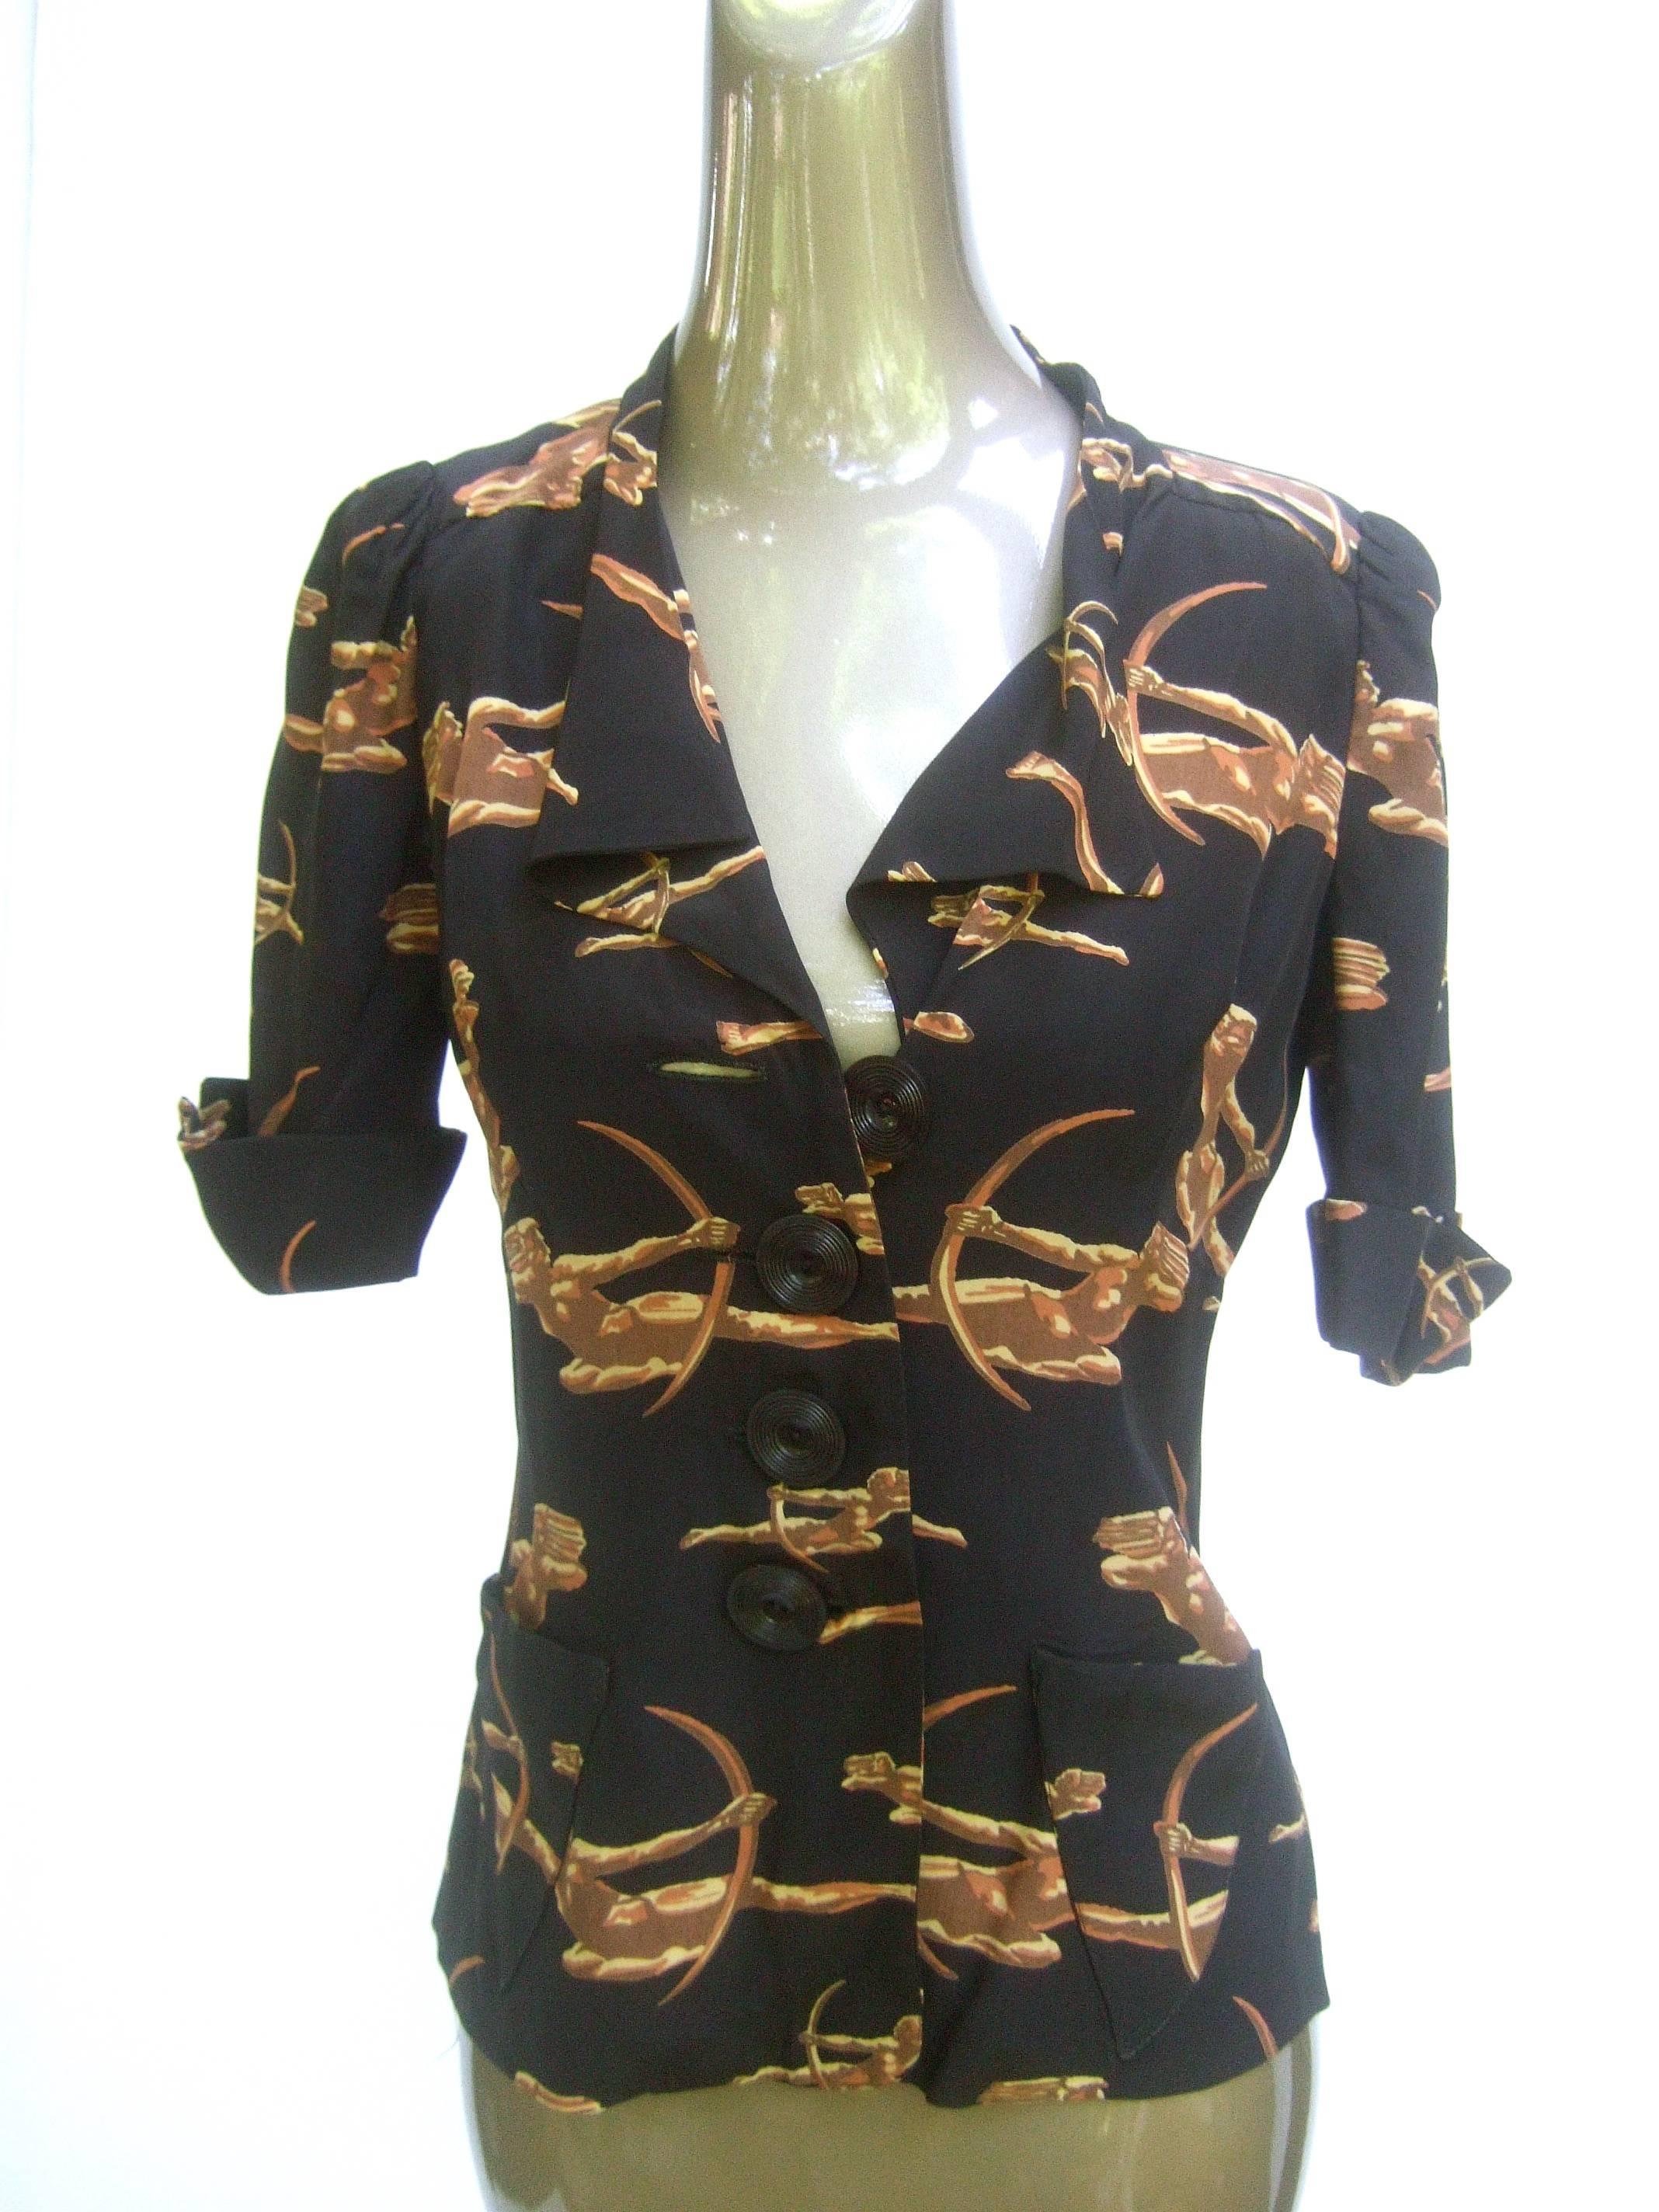 Biba Blouse Printed With Classical Archers. Late 1960's. 3